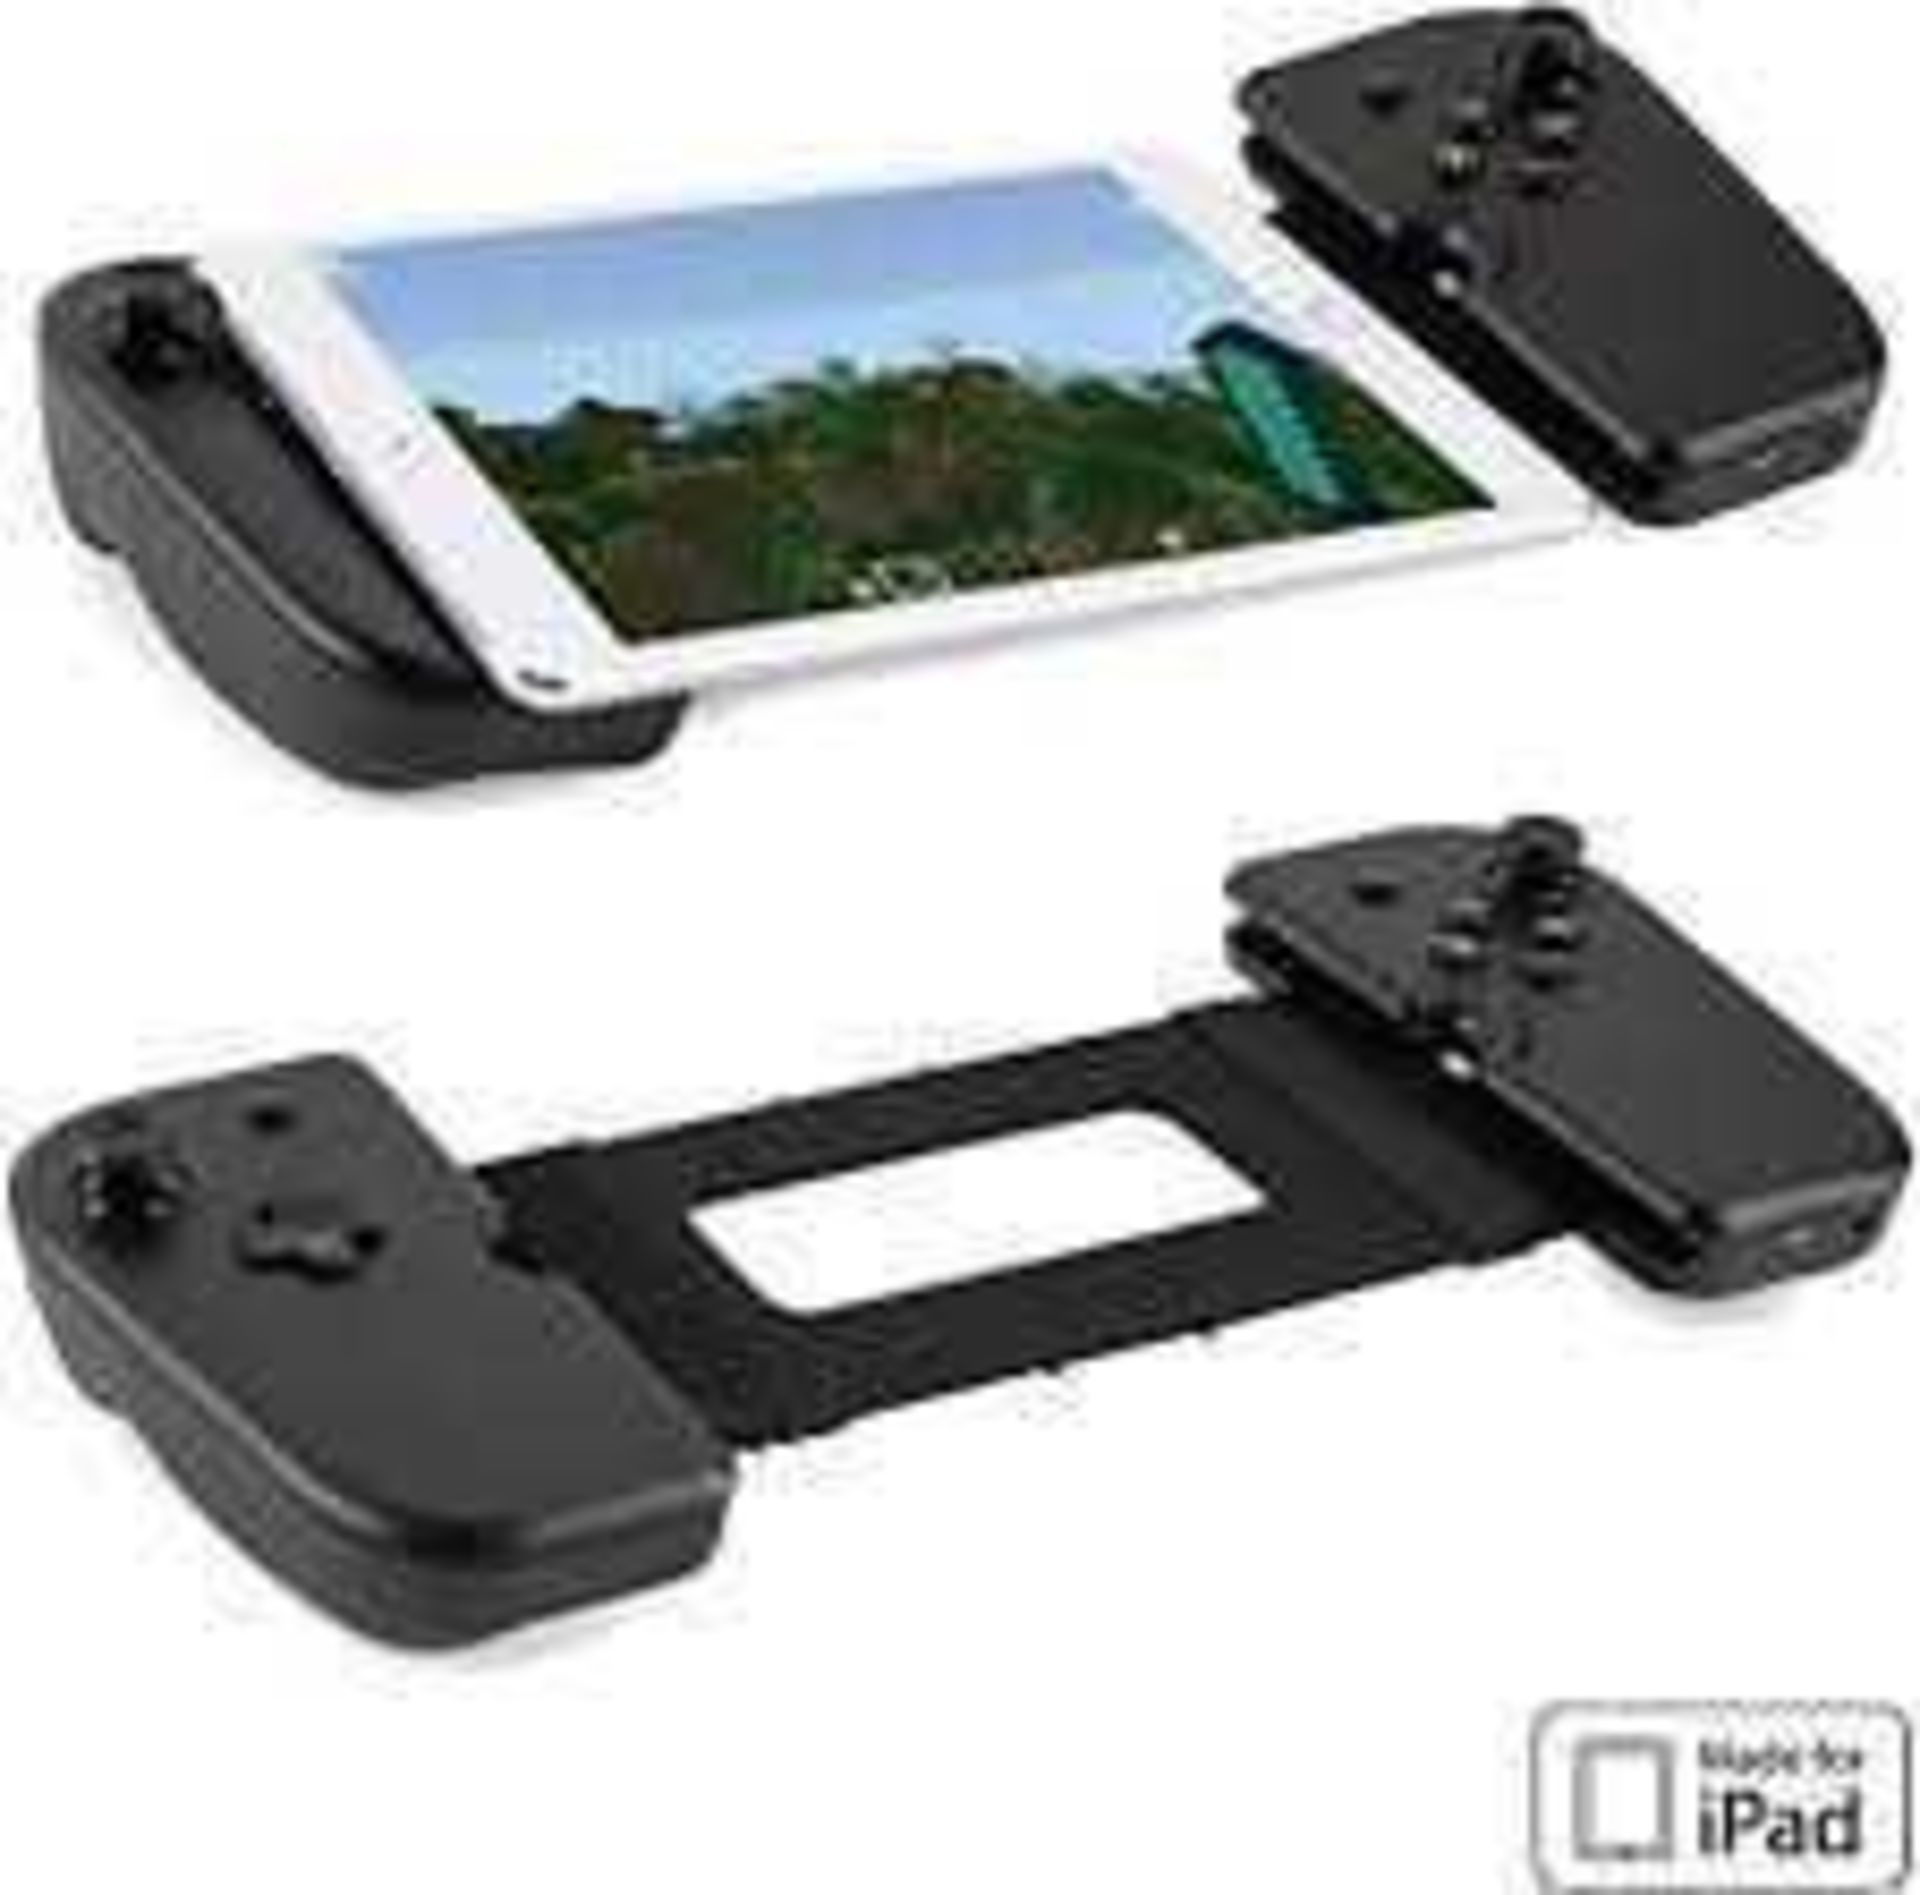 RRP £200 Lot To Contain 2 Boxed Game Vice Ipad Gaming Grip Controllers Compatiable With Ipad Air